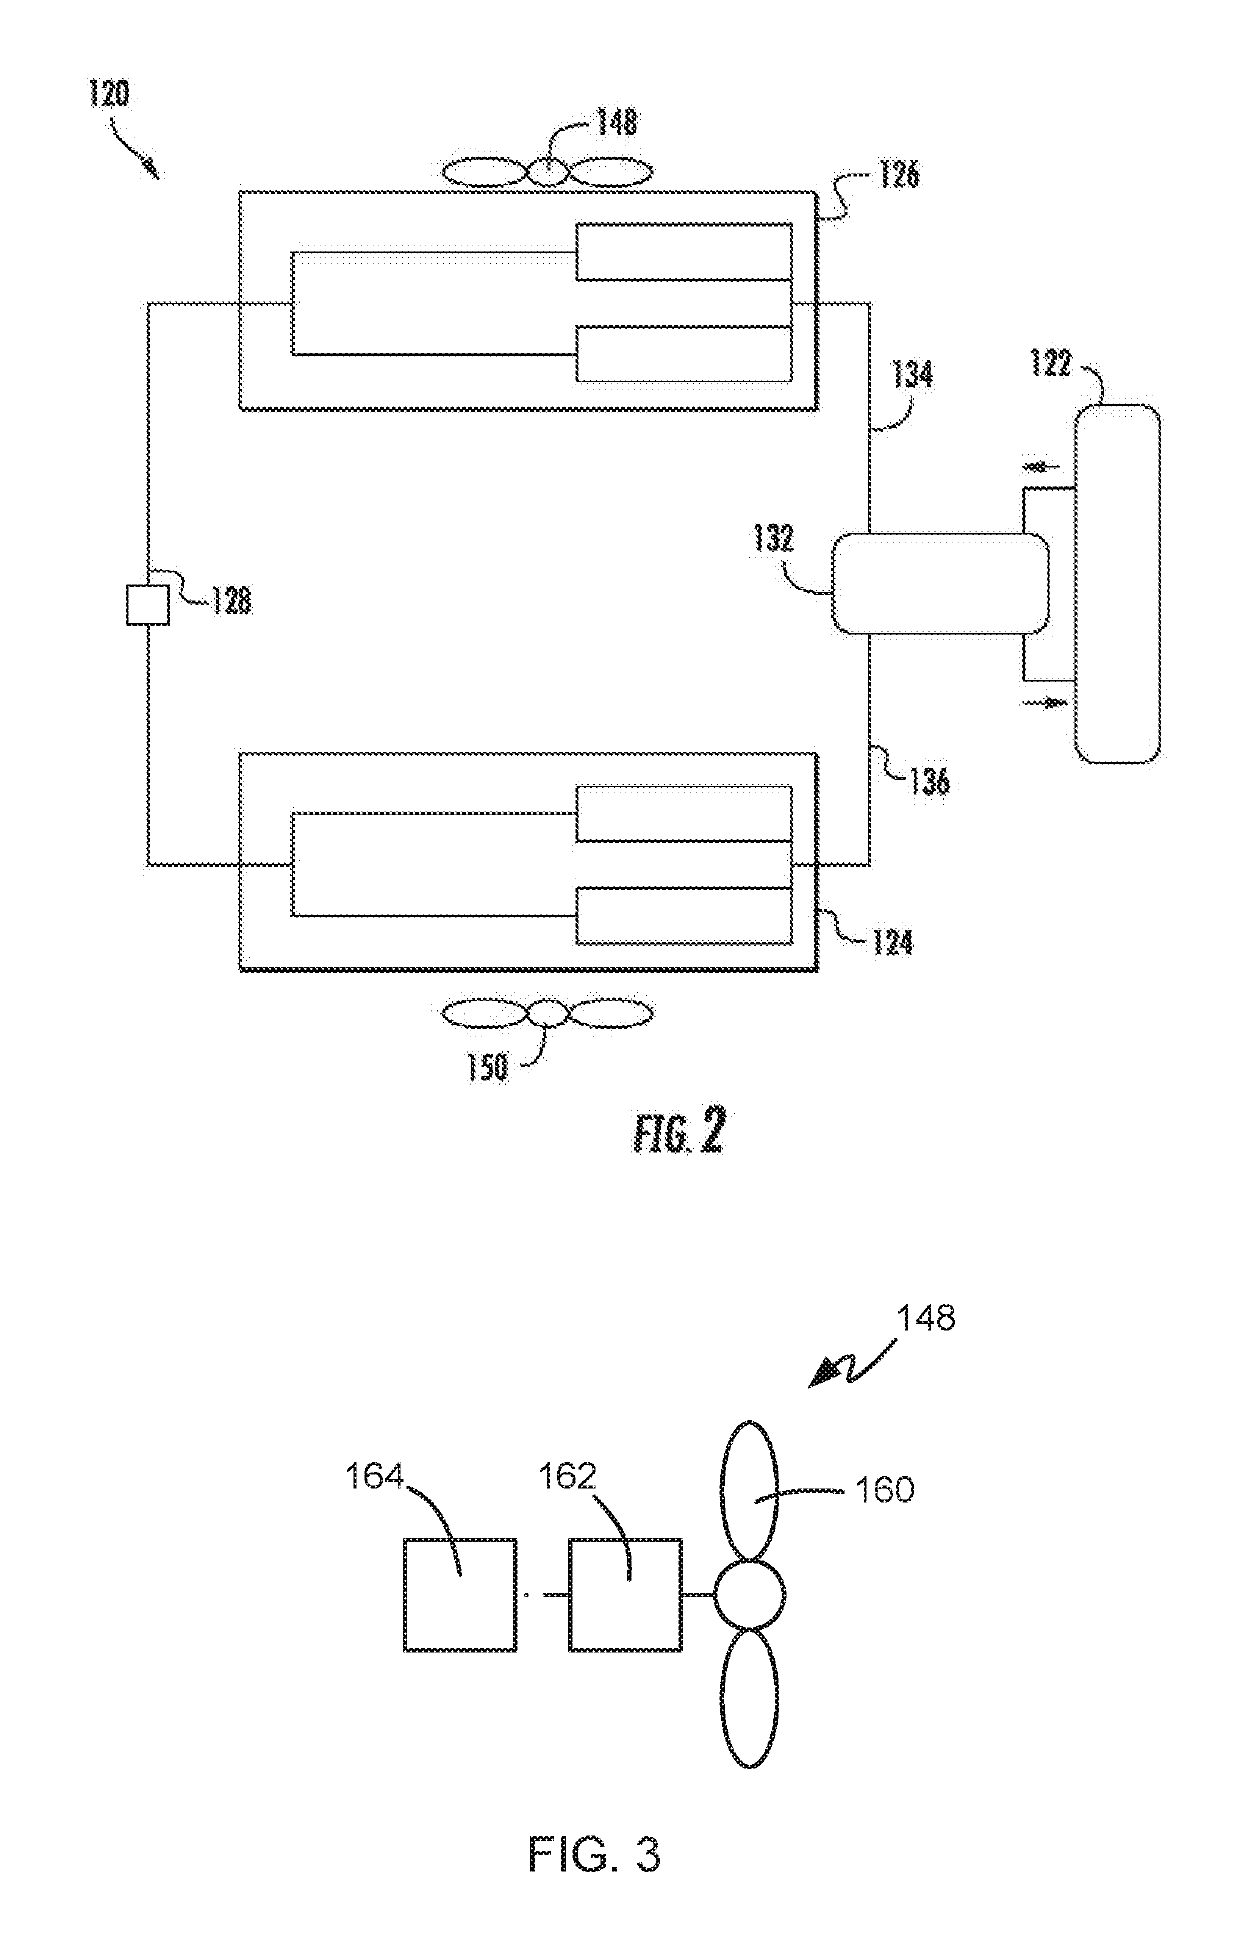 Method for operating a packaged terminal air conditioner